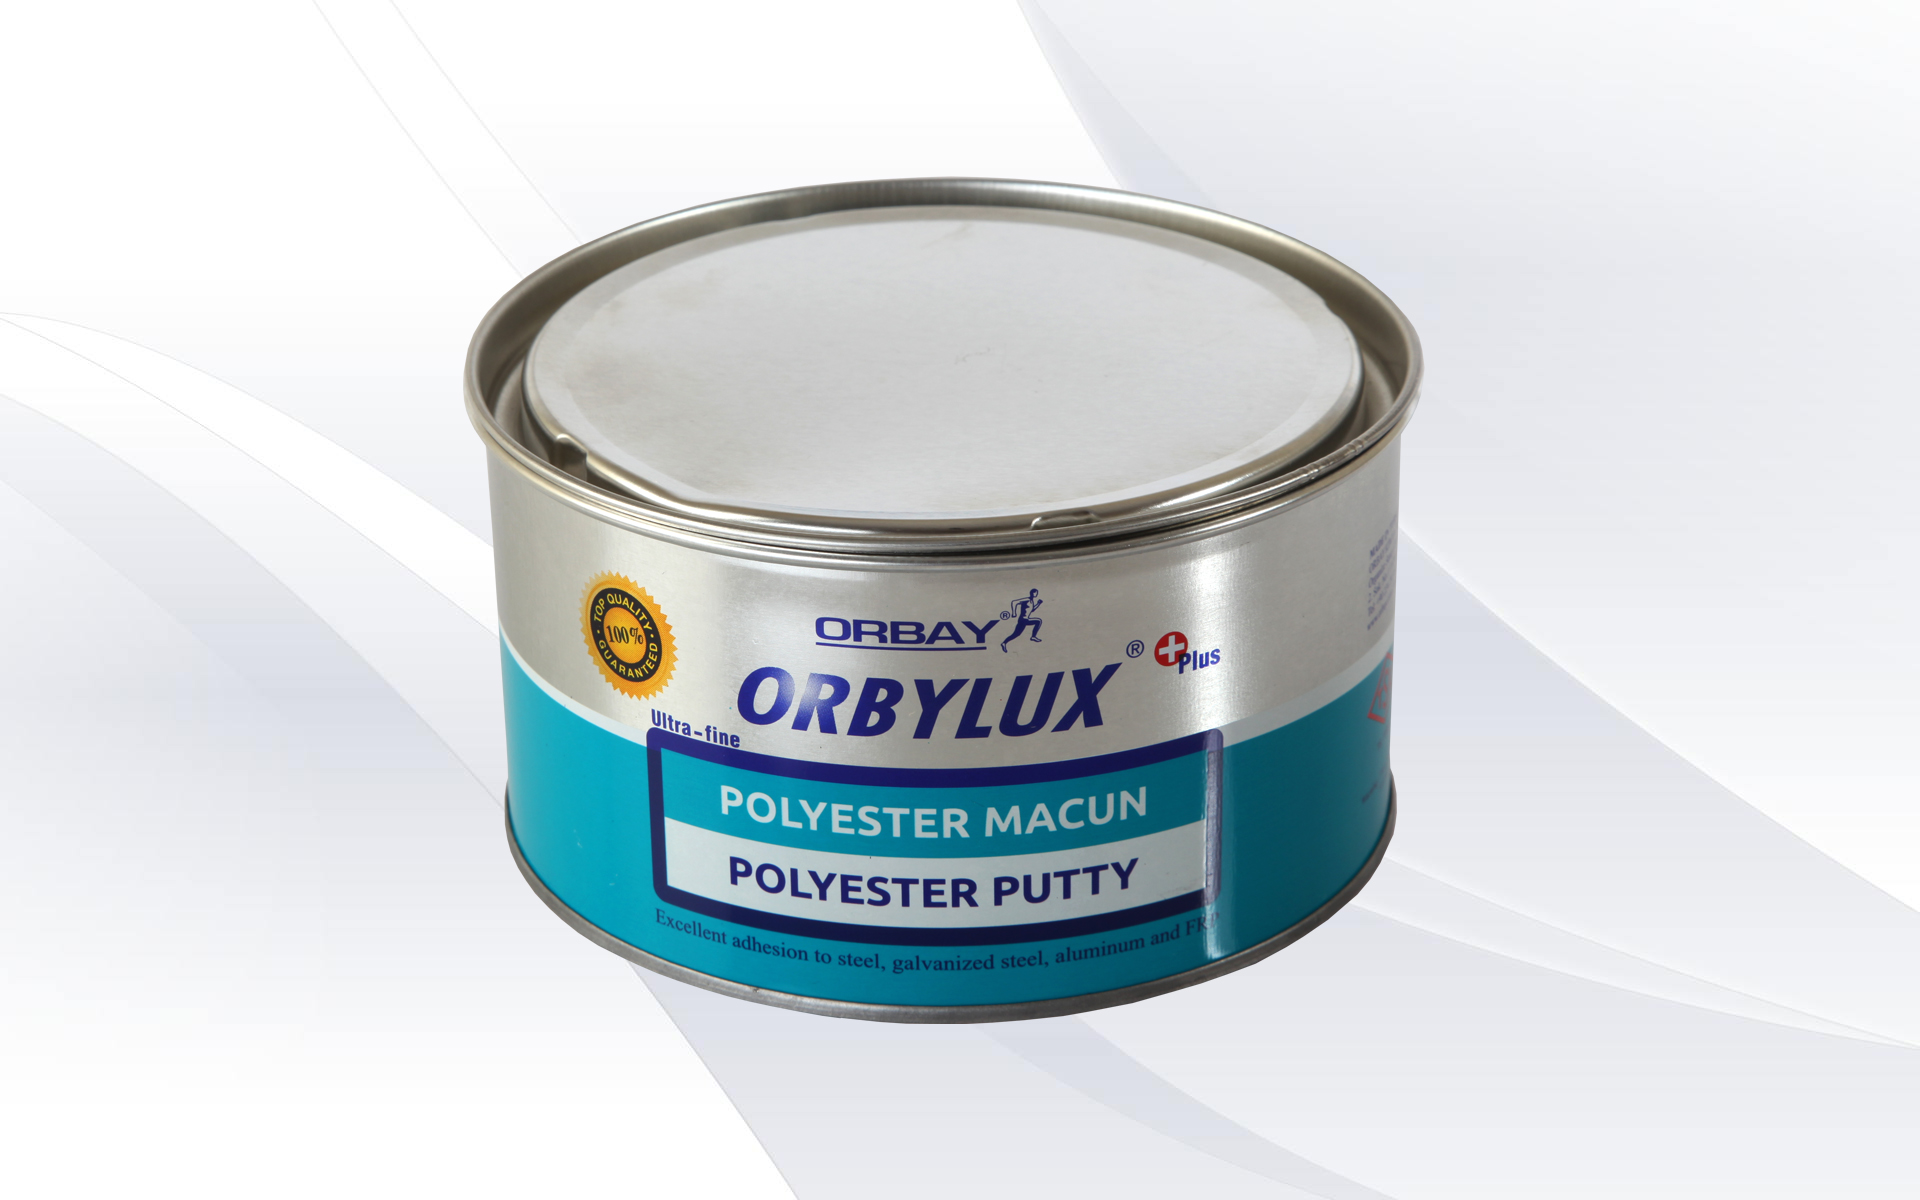 Orbylux Plus Polyester Macun